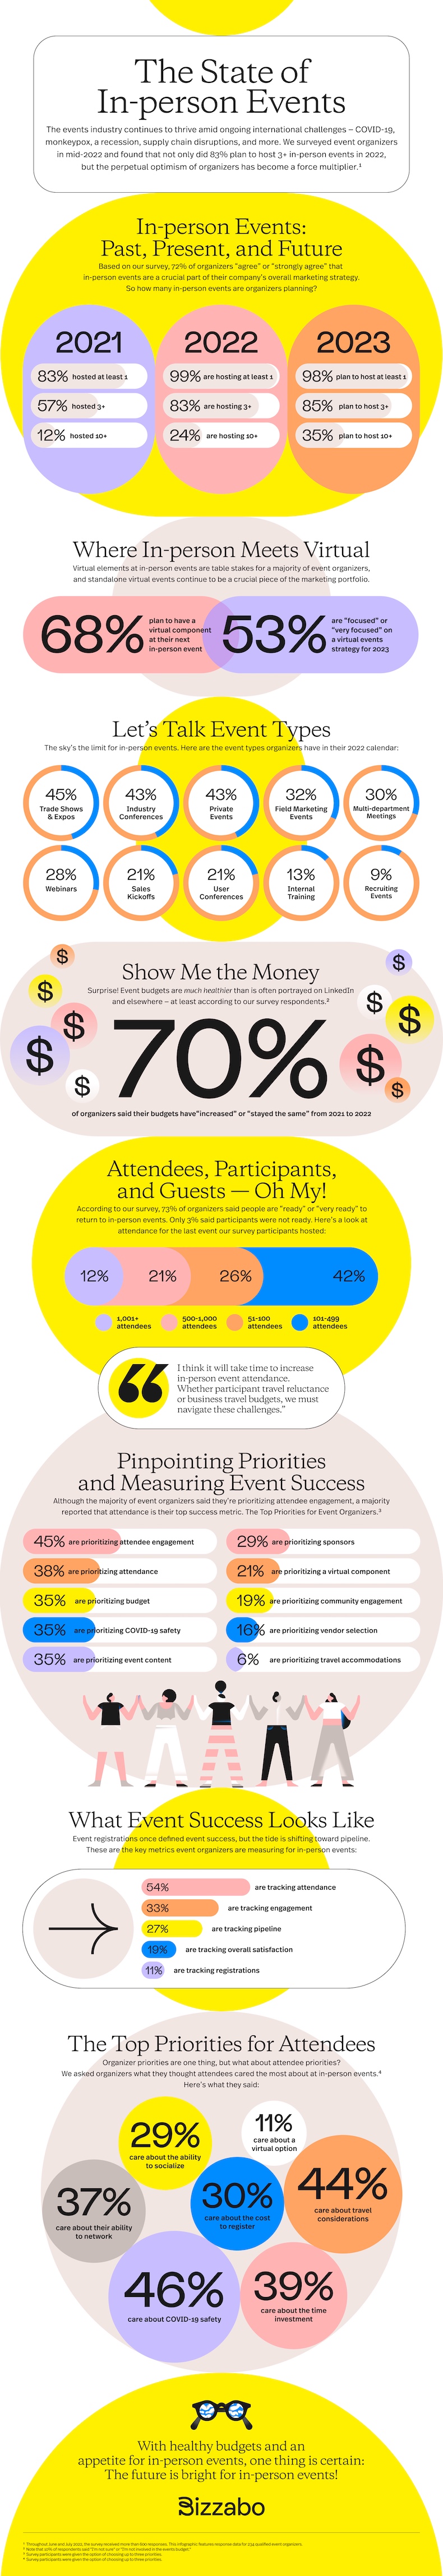 The state of in-person events infographic